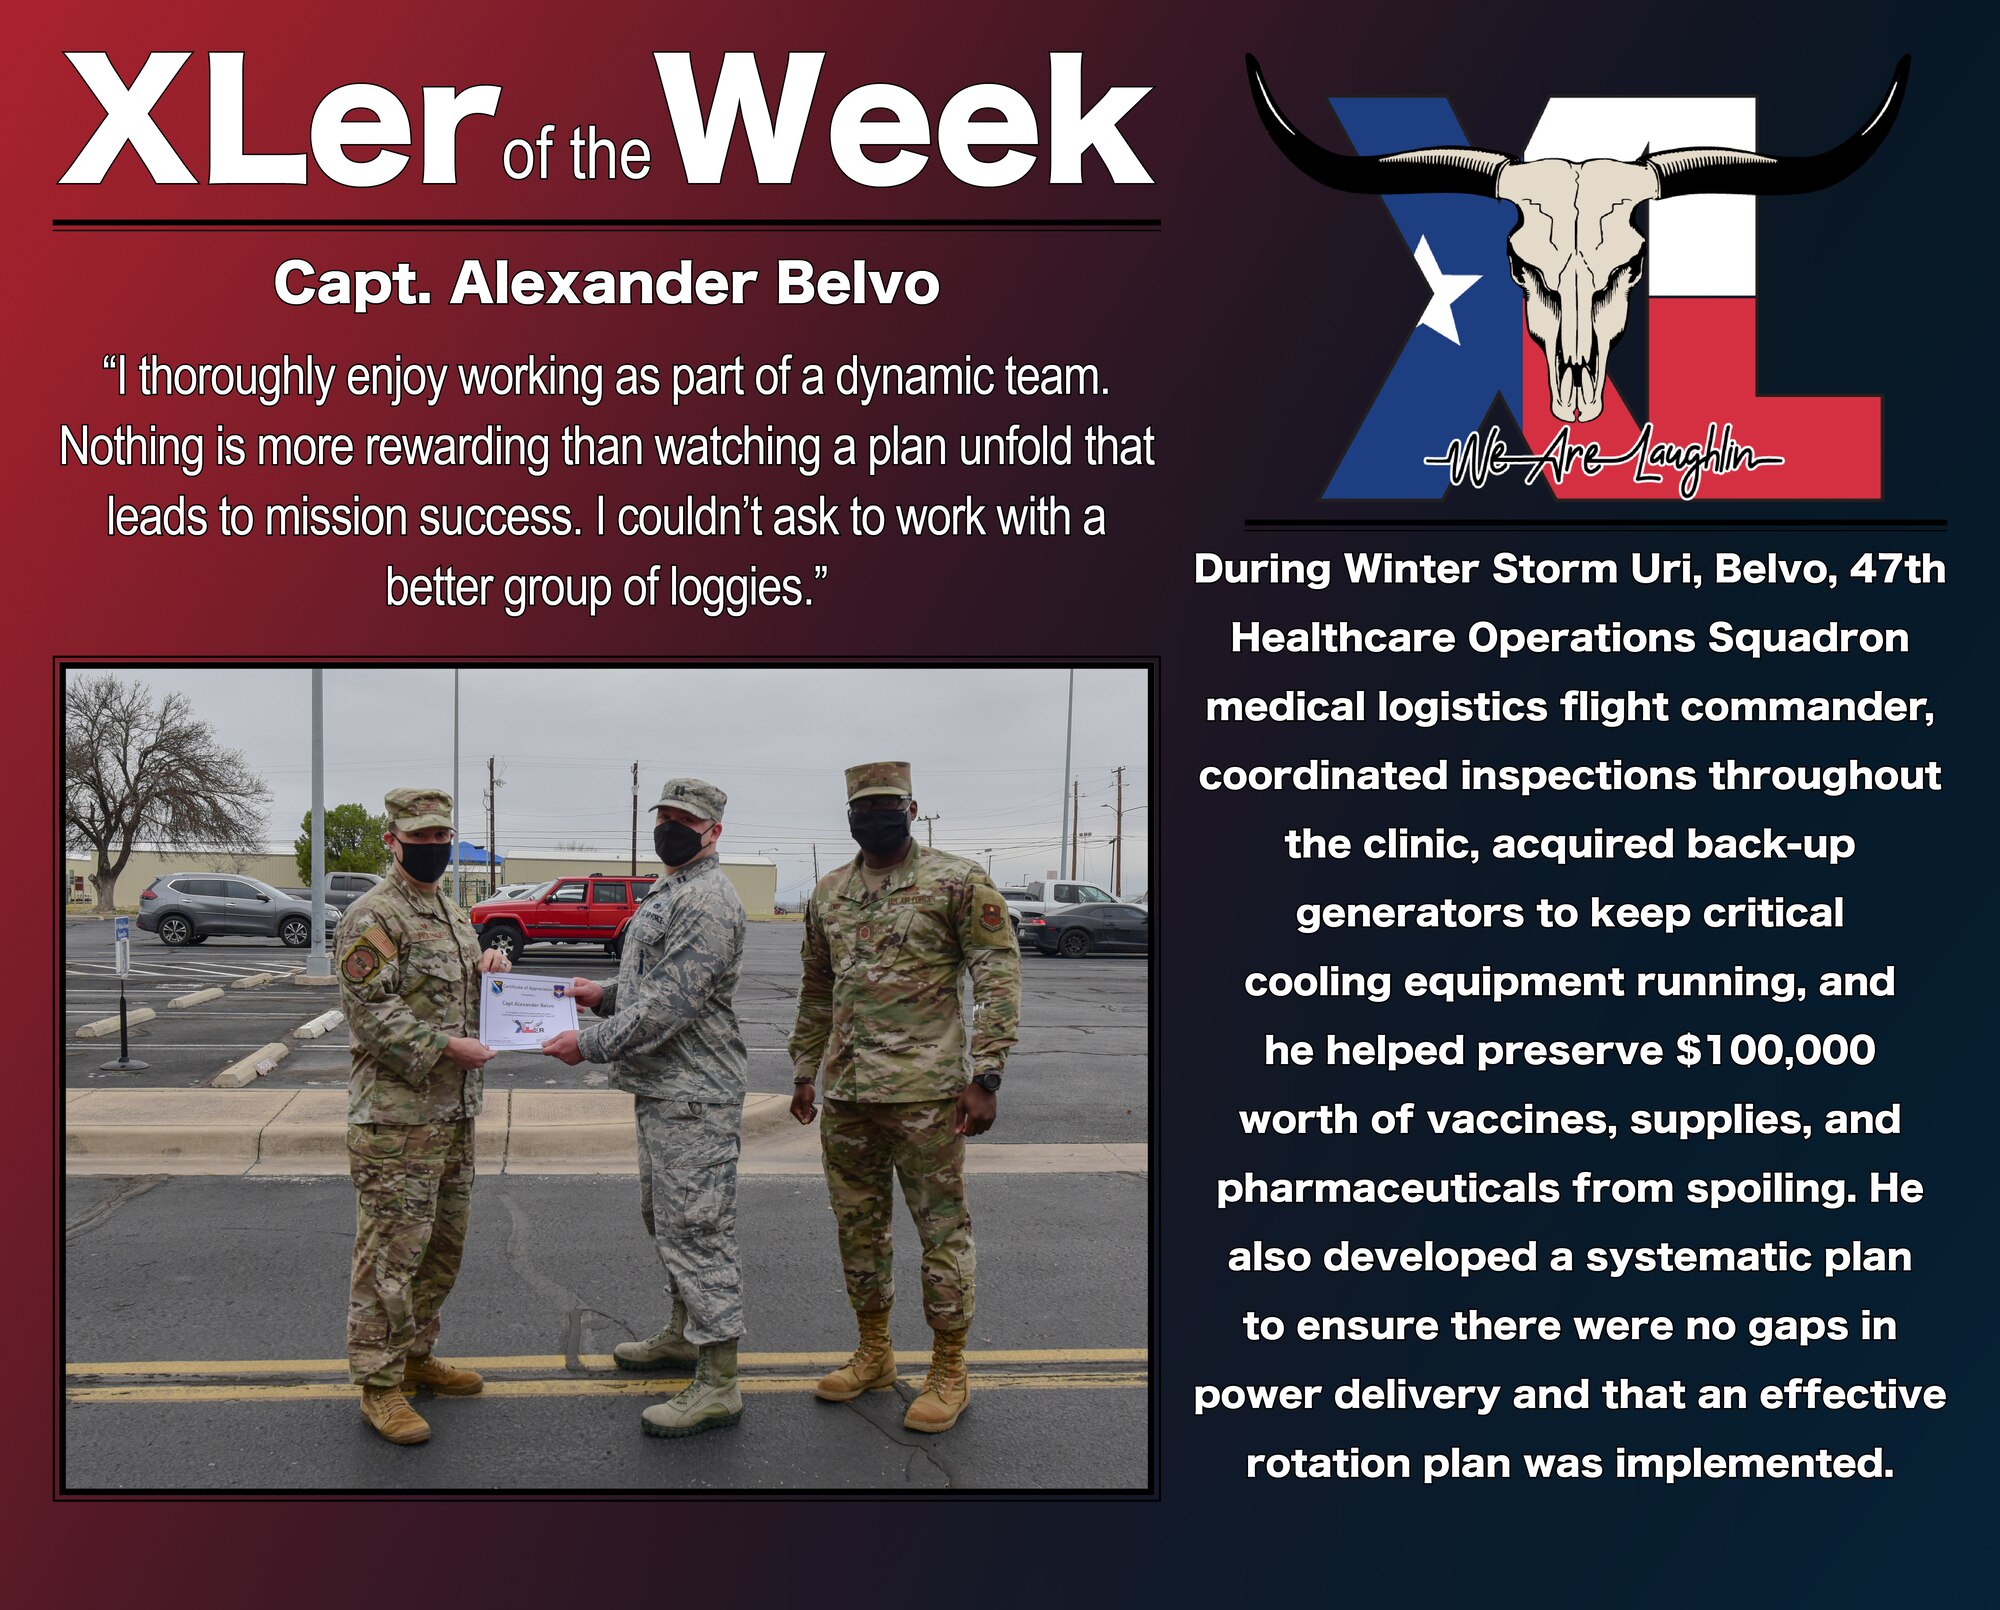 Capt. Alexander Belvo, 47th Healthcare Operations Squadron medical logistics flight commander, was chosen by wing leadership to be the “XLer of the Week”, the week of Mar. 8, 2021, at Laughlin Air Force Base, Texas. The “XLer” award, presented by Col. Craig Prather, 47th Flying Training Wing commander, and Chief Master Sgt. Brian Lewis, 47th Operations Group superintendent, is given to those who consistently make outstanding contributions to their unit and the Laughlin mission. (U.S. Air Force Graphic by Senior Airman Anne McCready)